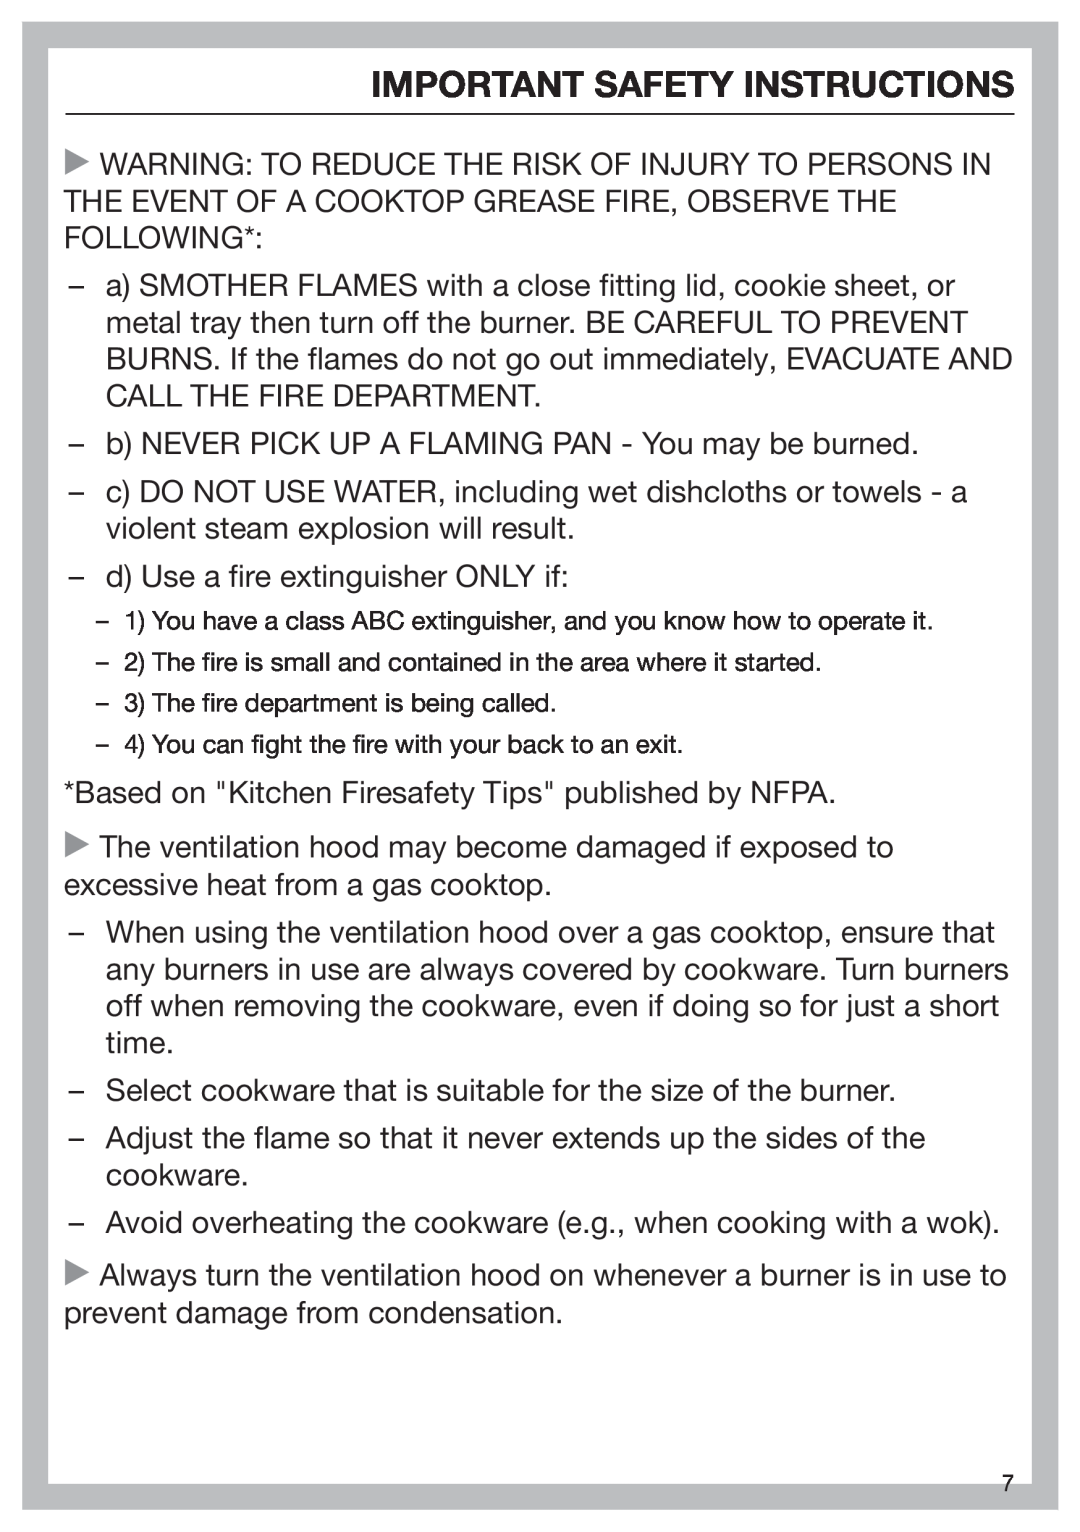 Miele 09 968 240 installation instructions Important Safety Instructions, b NEVER PICK UP A FLAMING PAN - You may be burned 